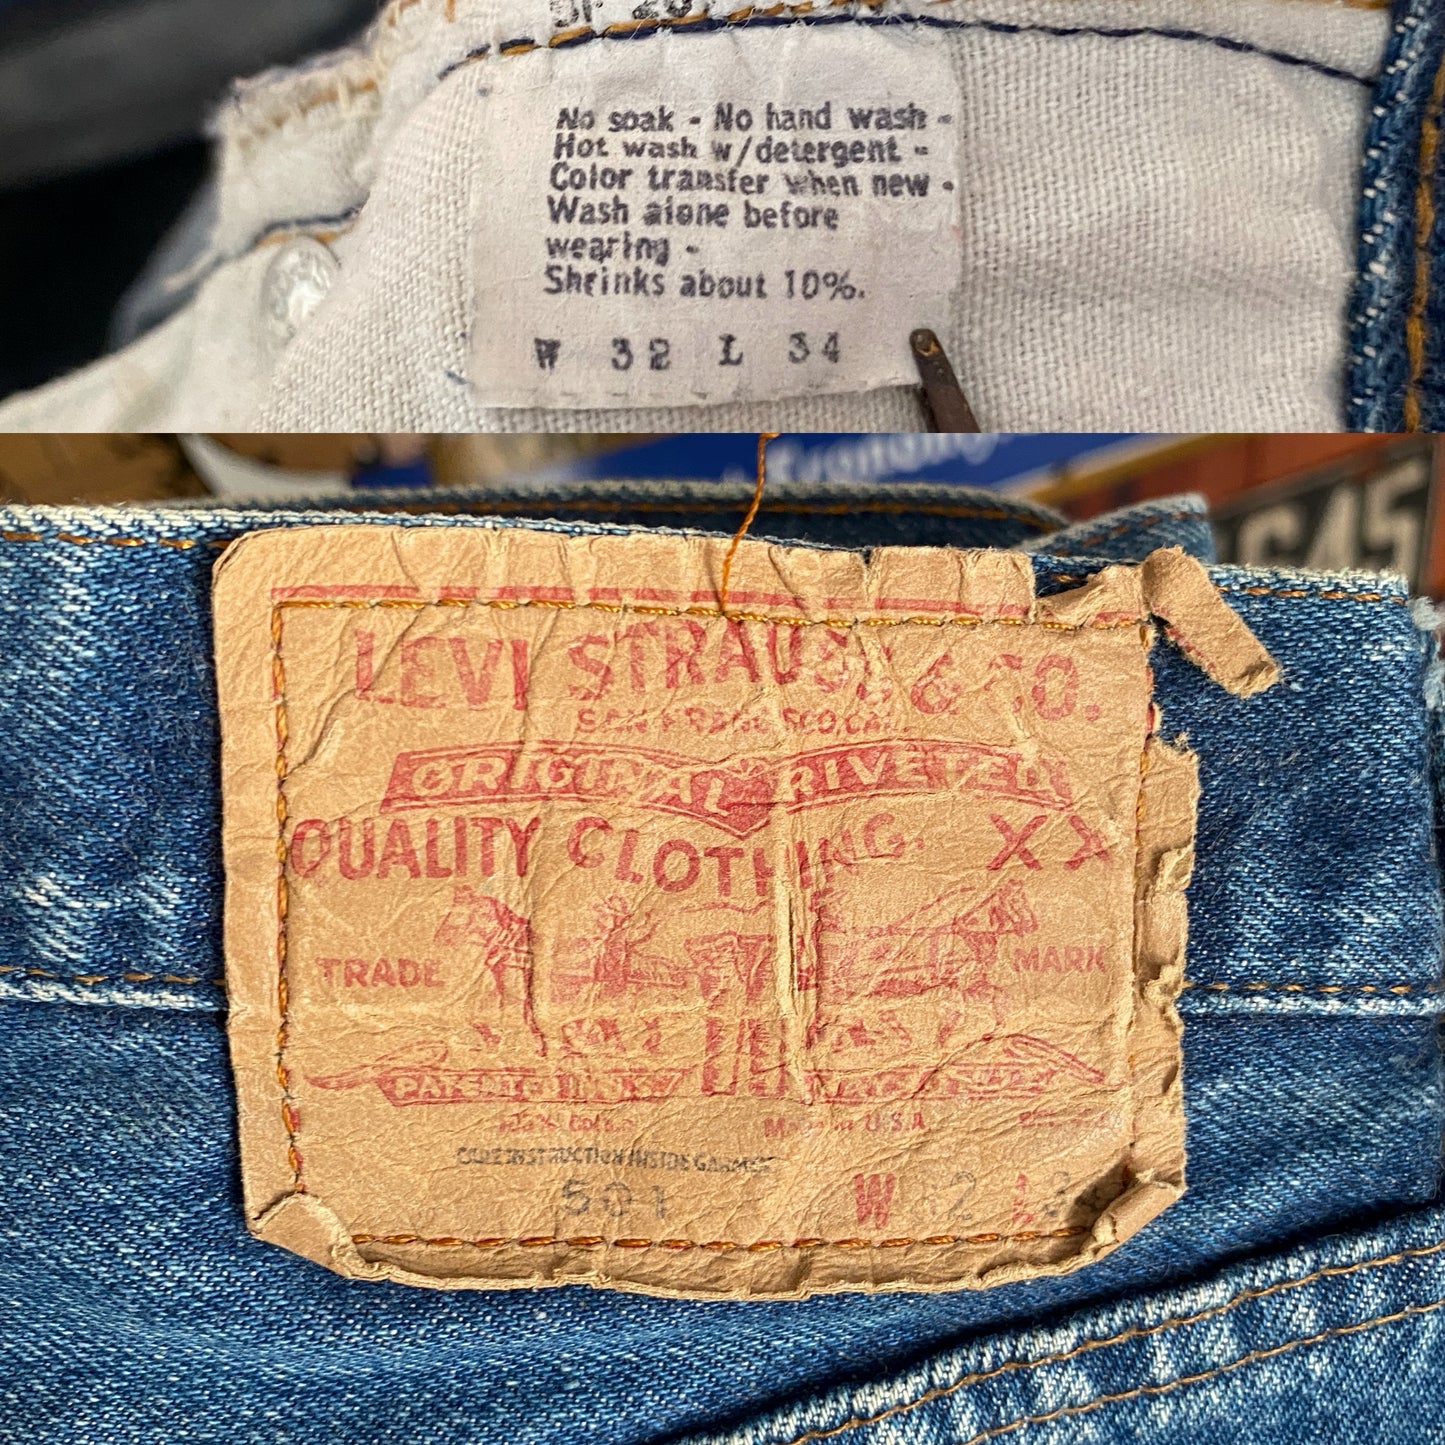 Levi’s 501 Vintage Selvedge Red Line Jeans Made in USA - Size 32x34